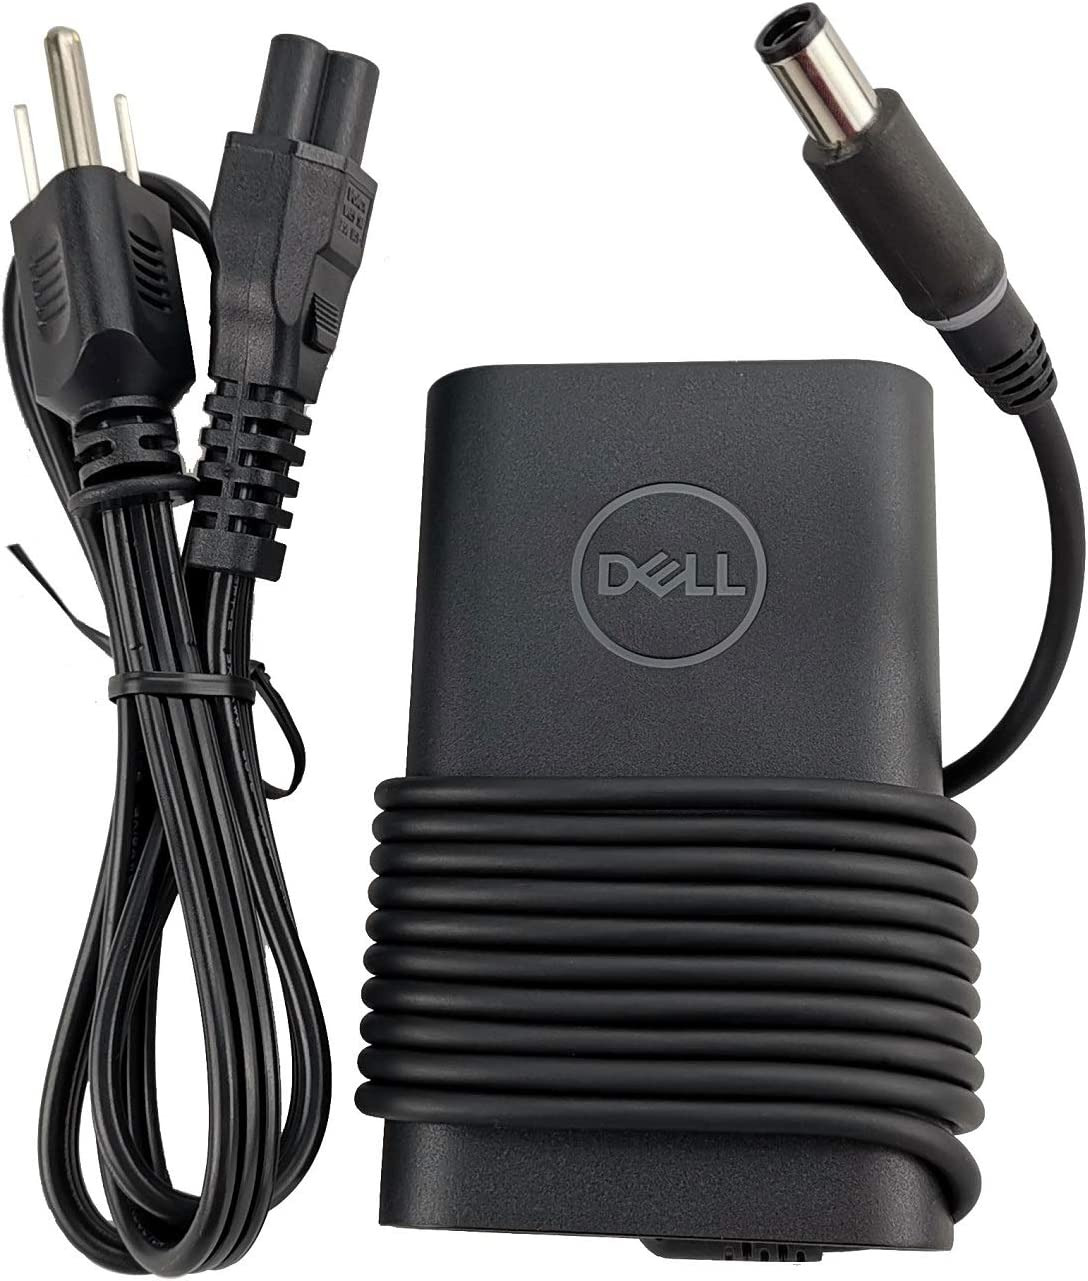 Genuine 65W AC Adapter Charger for Dell Latitude LA65NM130 06TFFF 06TM1C 1X917